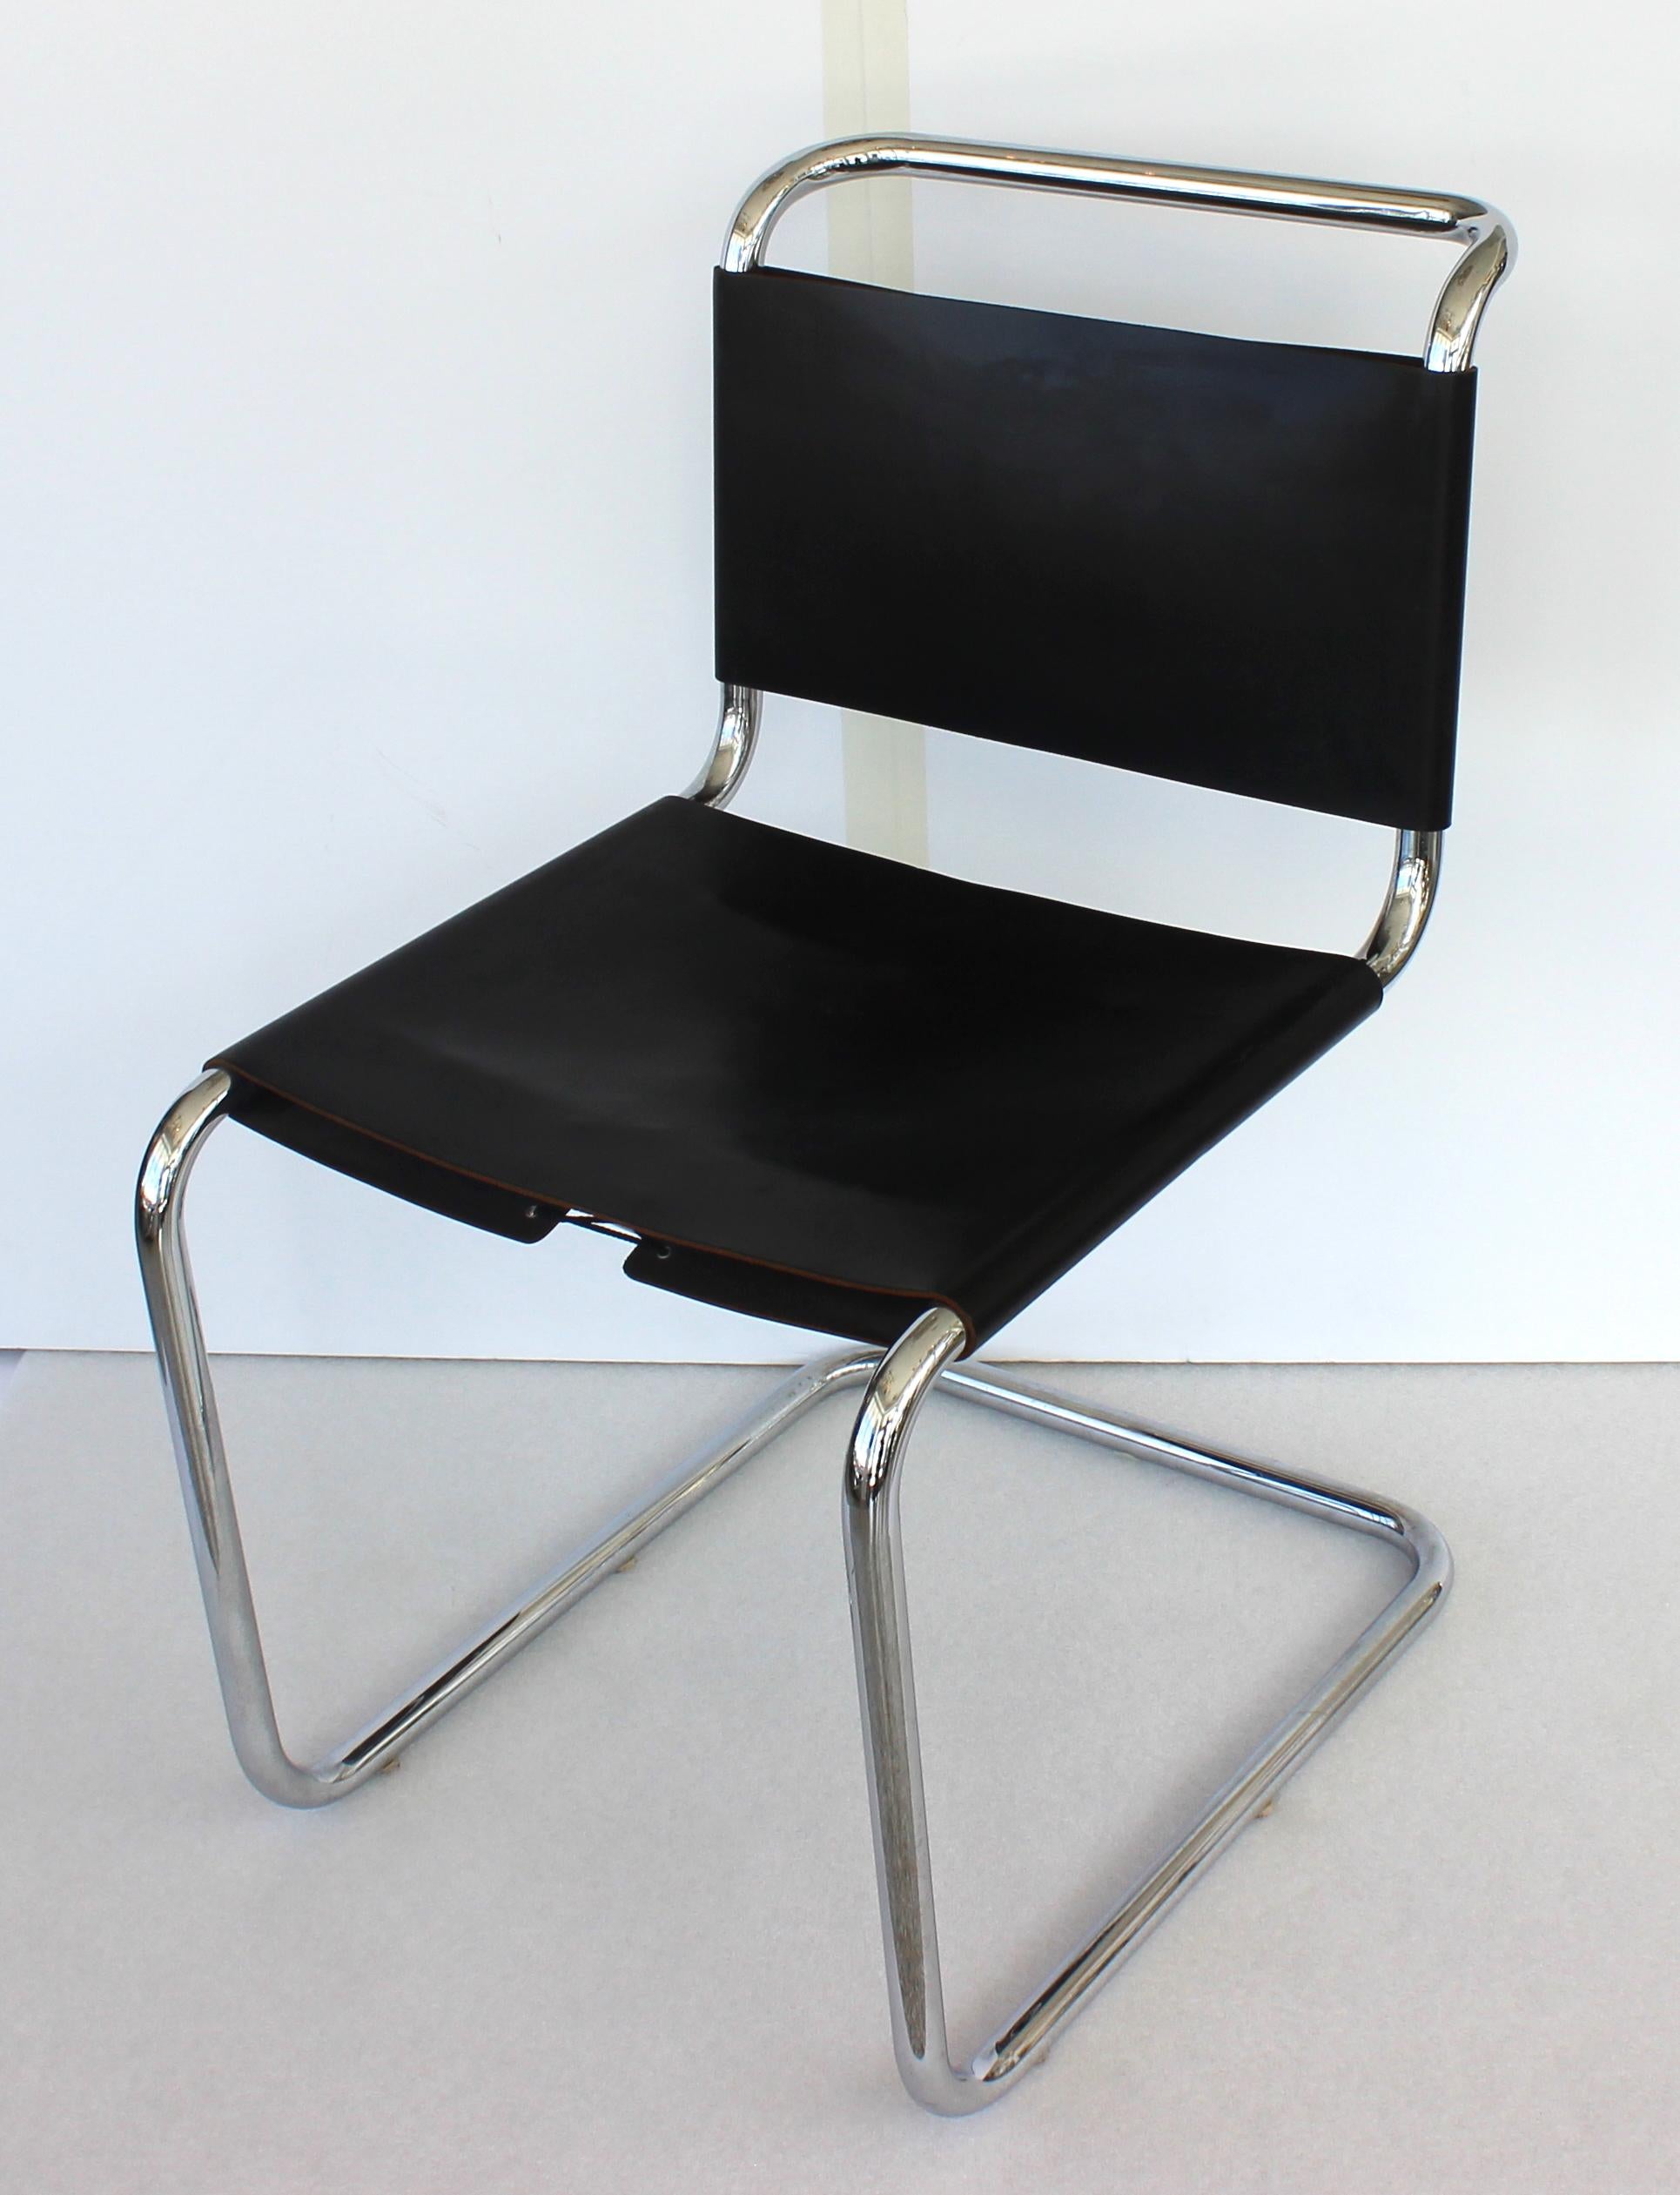 This piece is in the style of the  Mies van der Rohe MR10 chair, and it dates to the 1970s. 

Note: The piece is fabricated in polished chrome with a black leather seat and back.